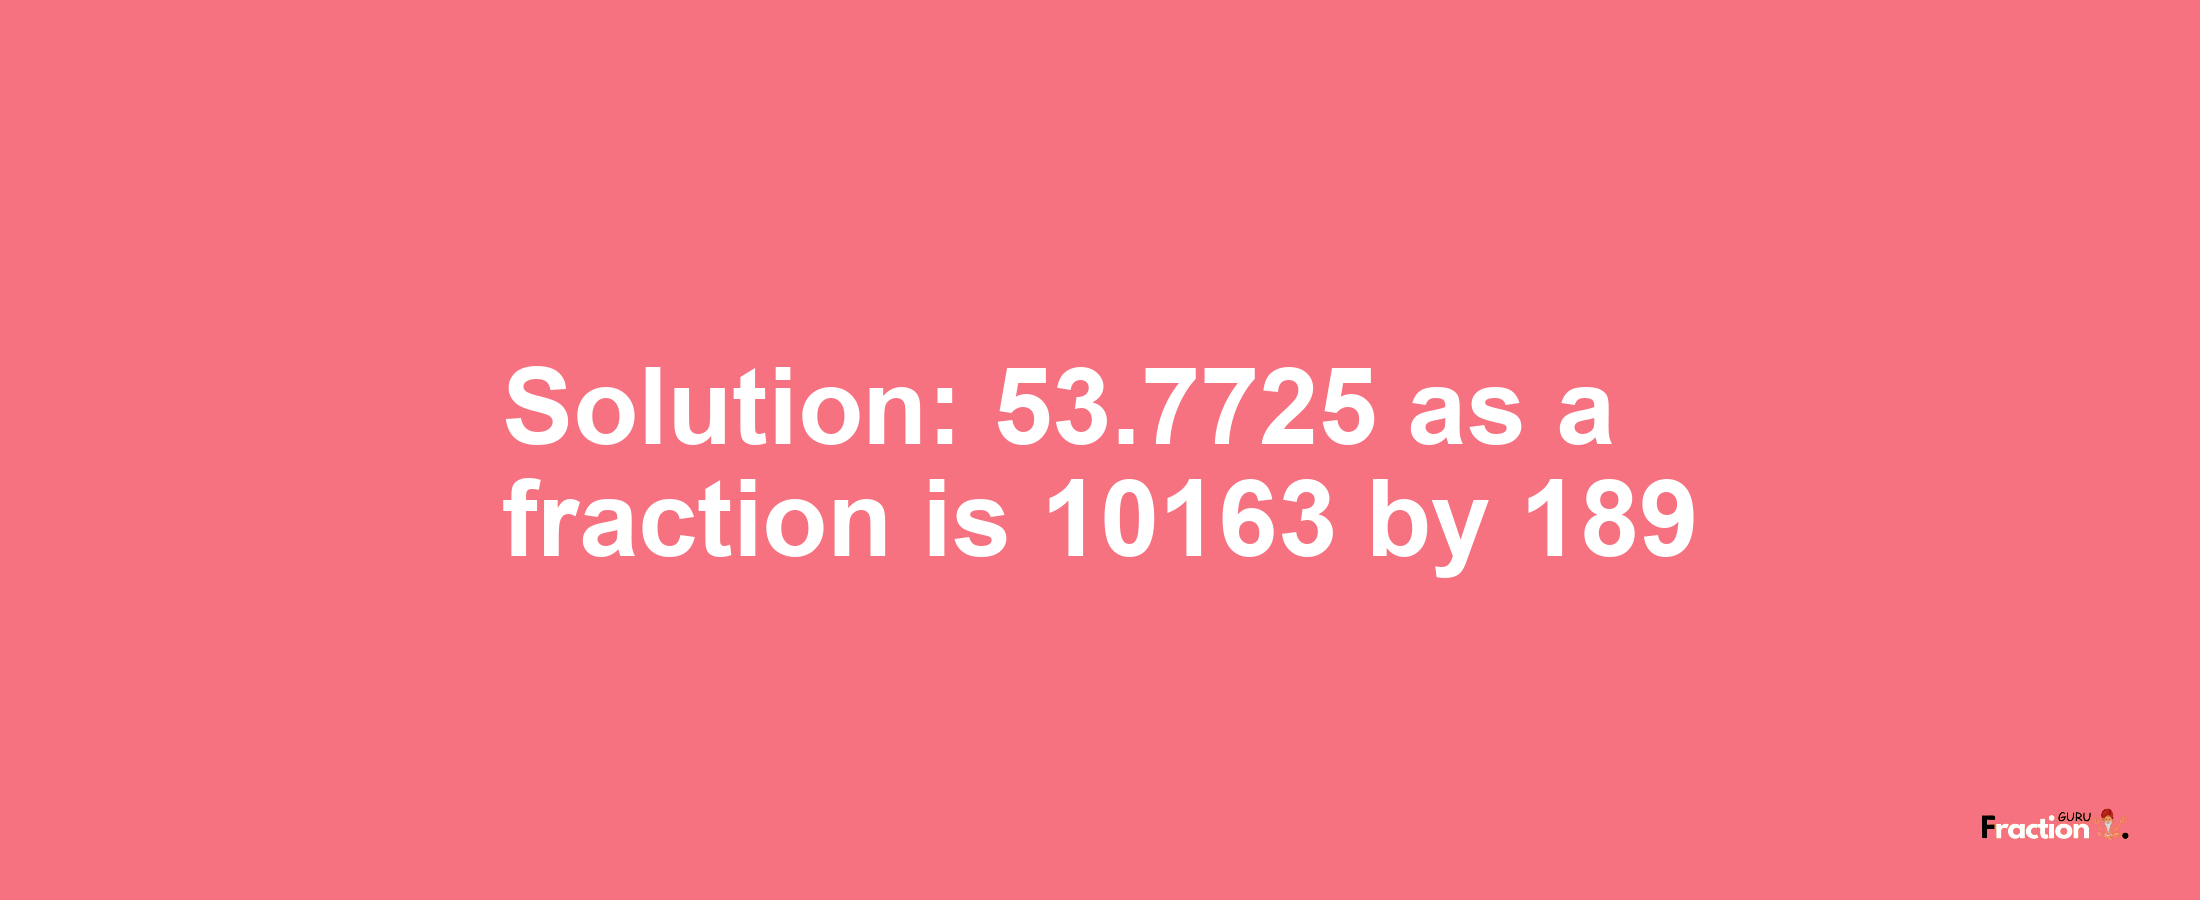 Solution:53.7725 as a fraction is 10163/189